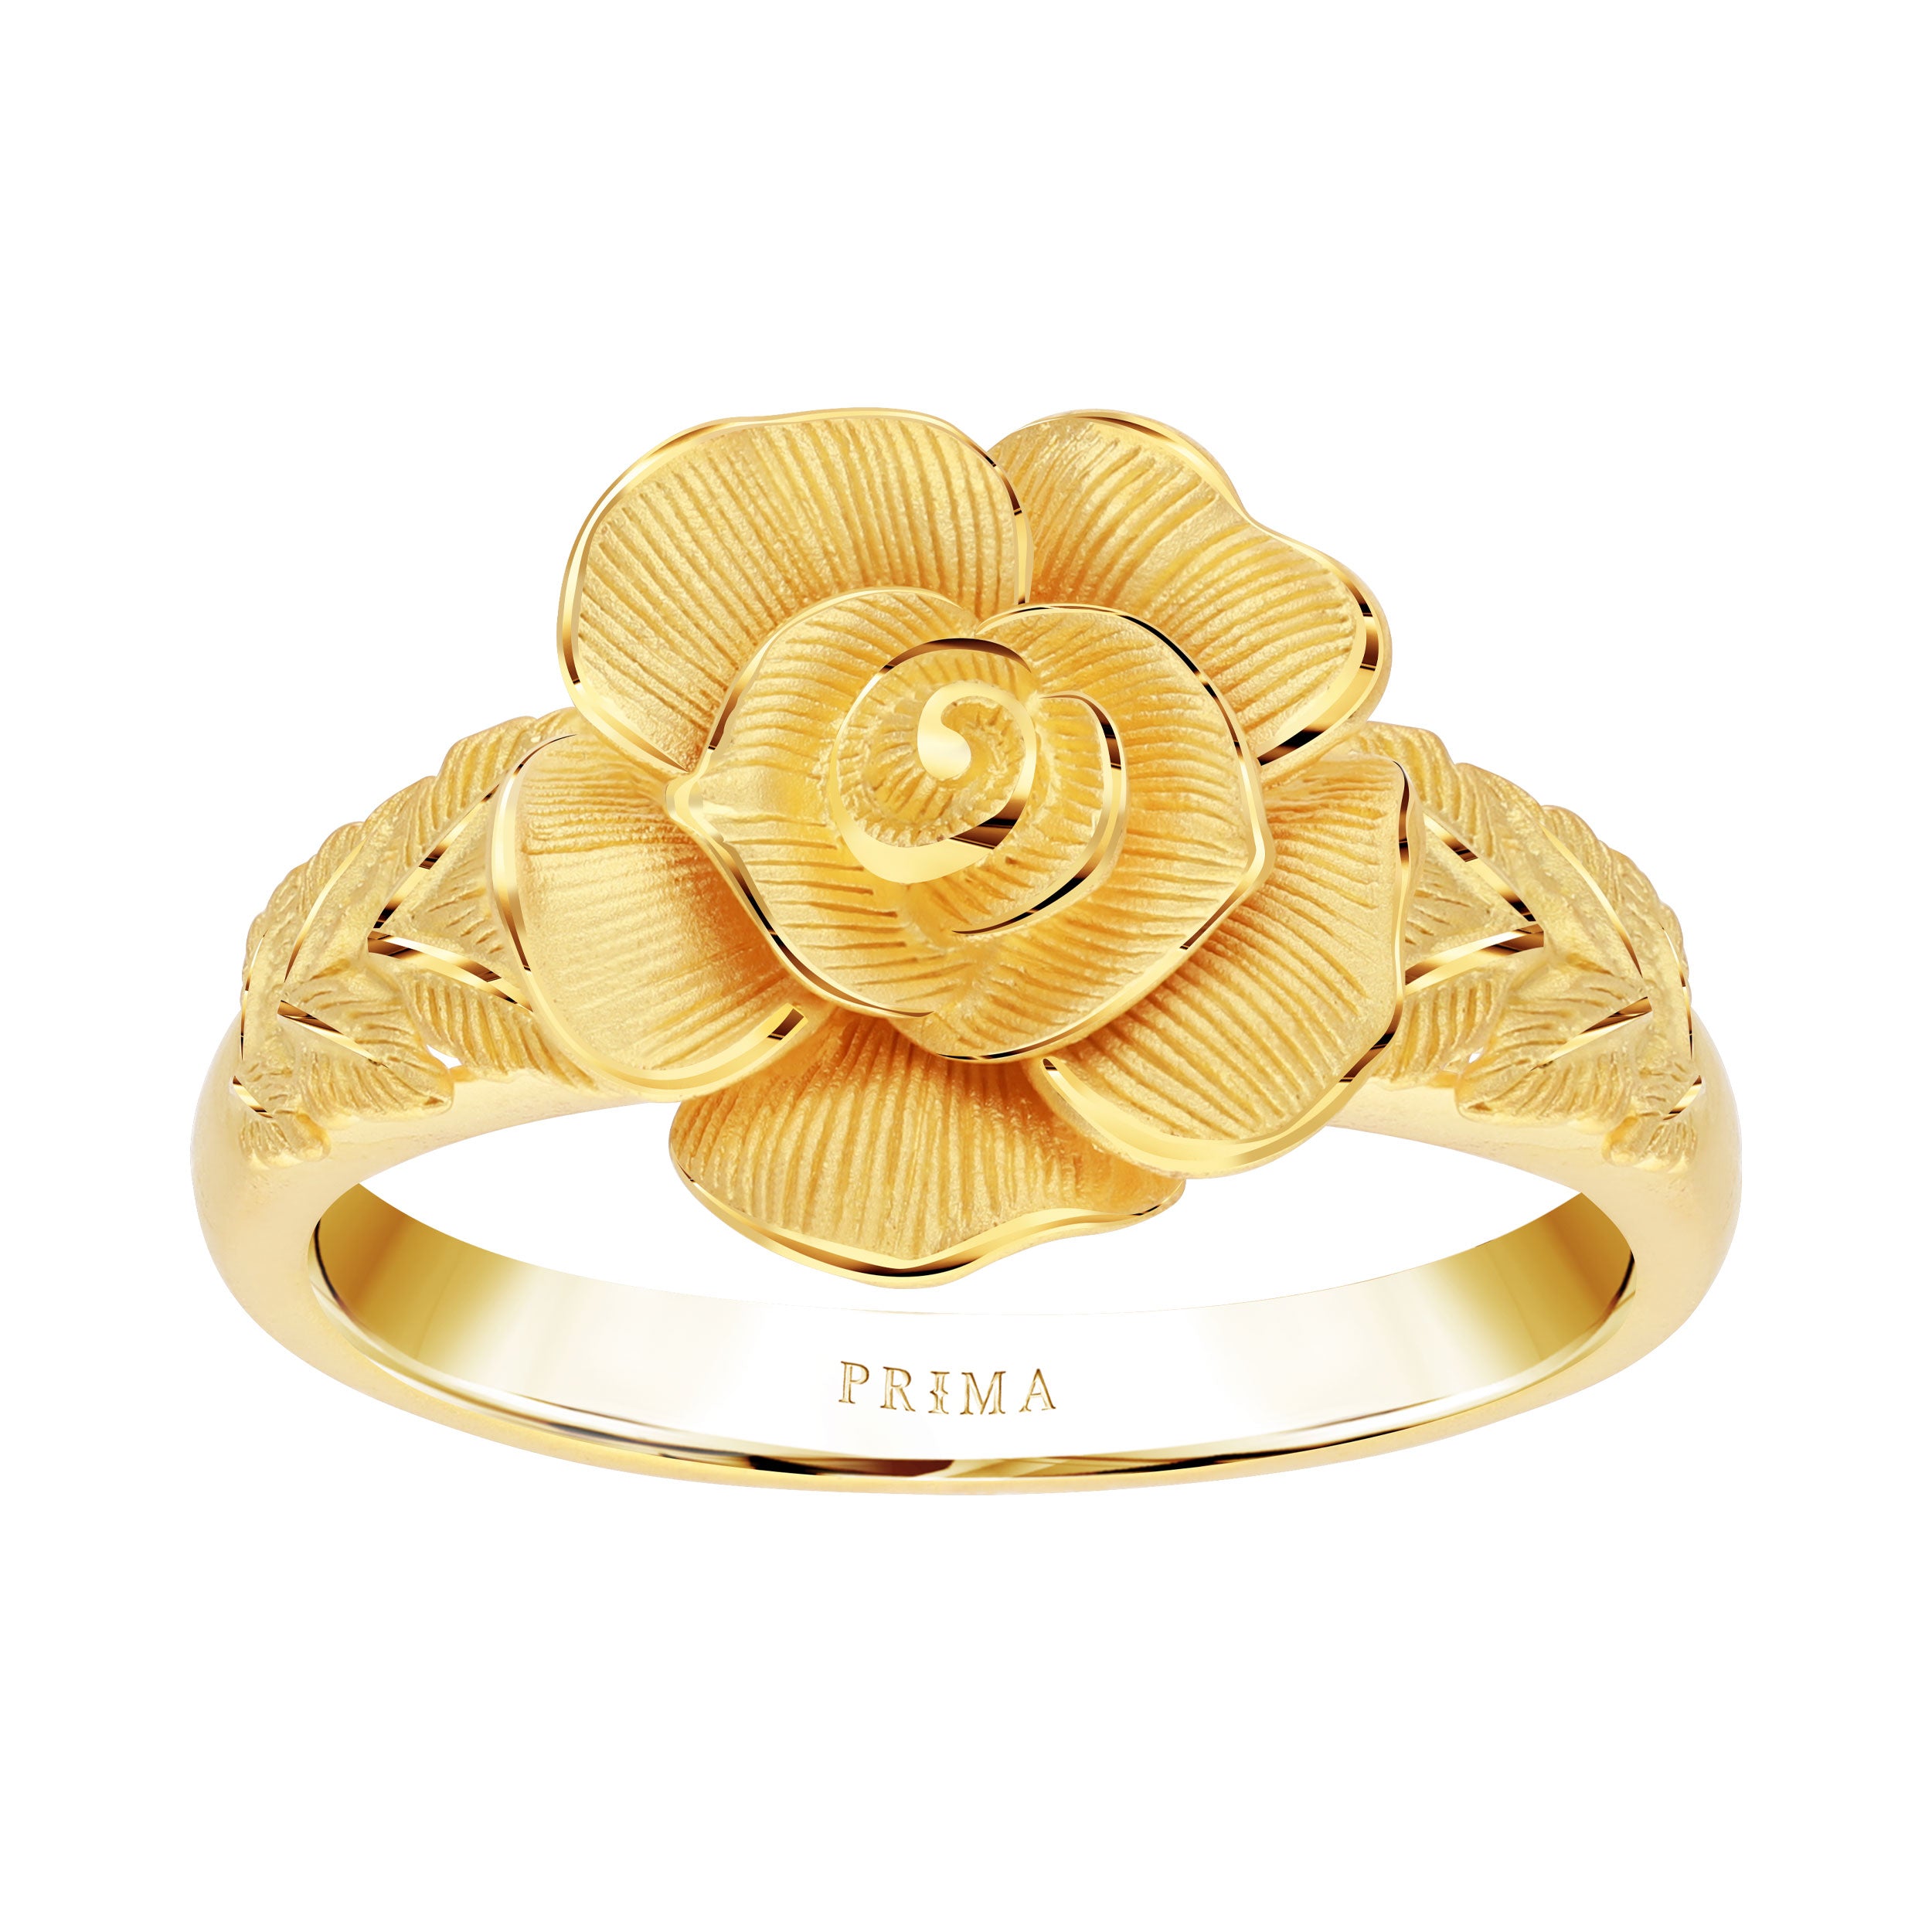 SilverWithGoldJewelry Product ID:1559629499 #goldjewelleryunique | Dubai  gold jewelry, Gold ring designs, Gold jewelry simple